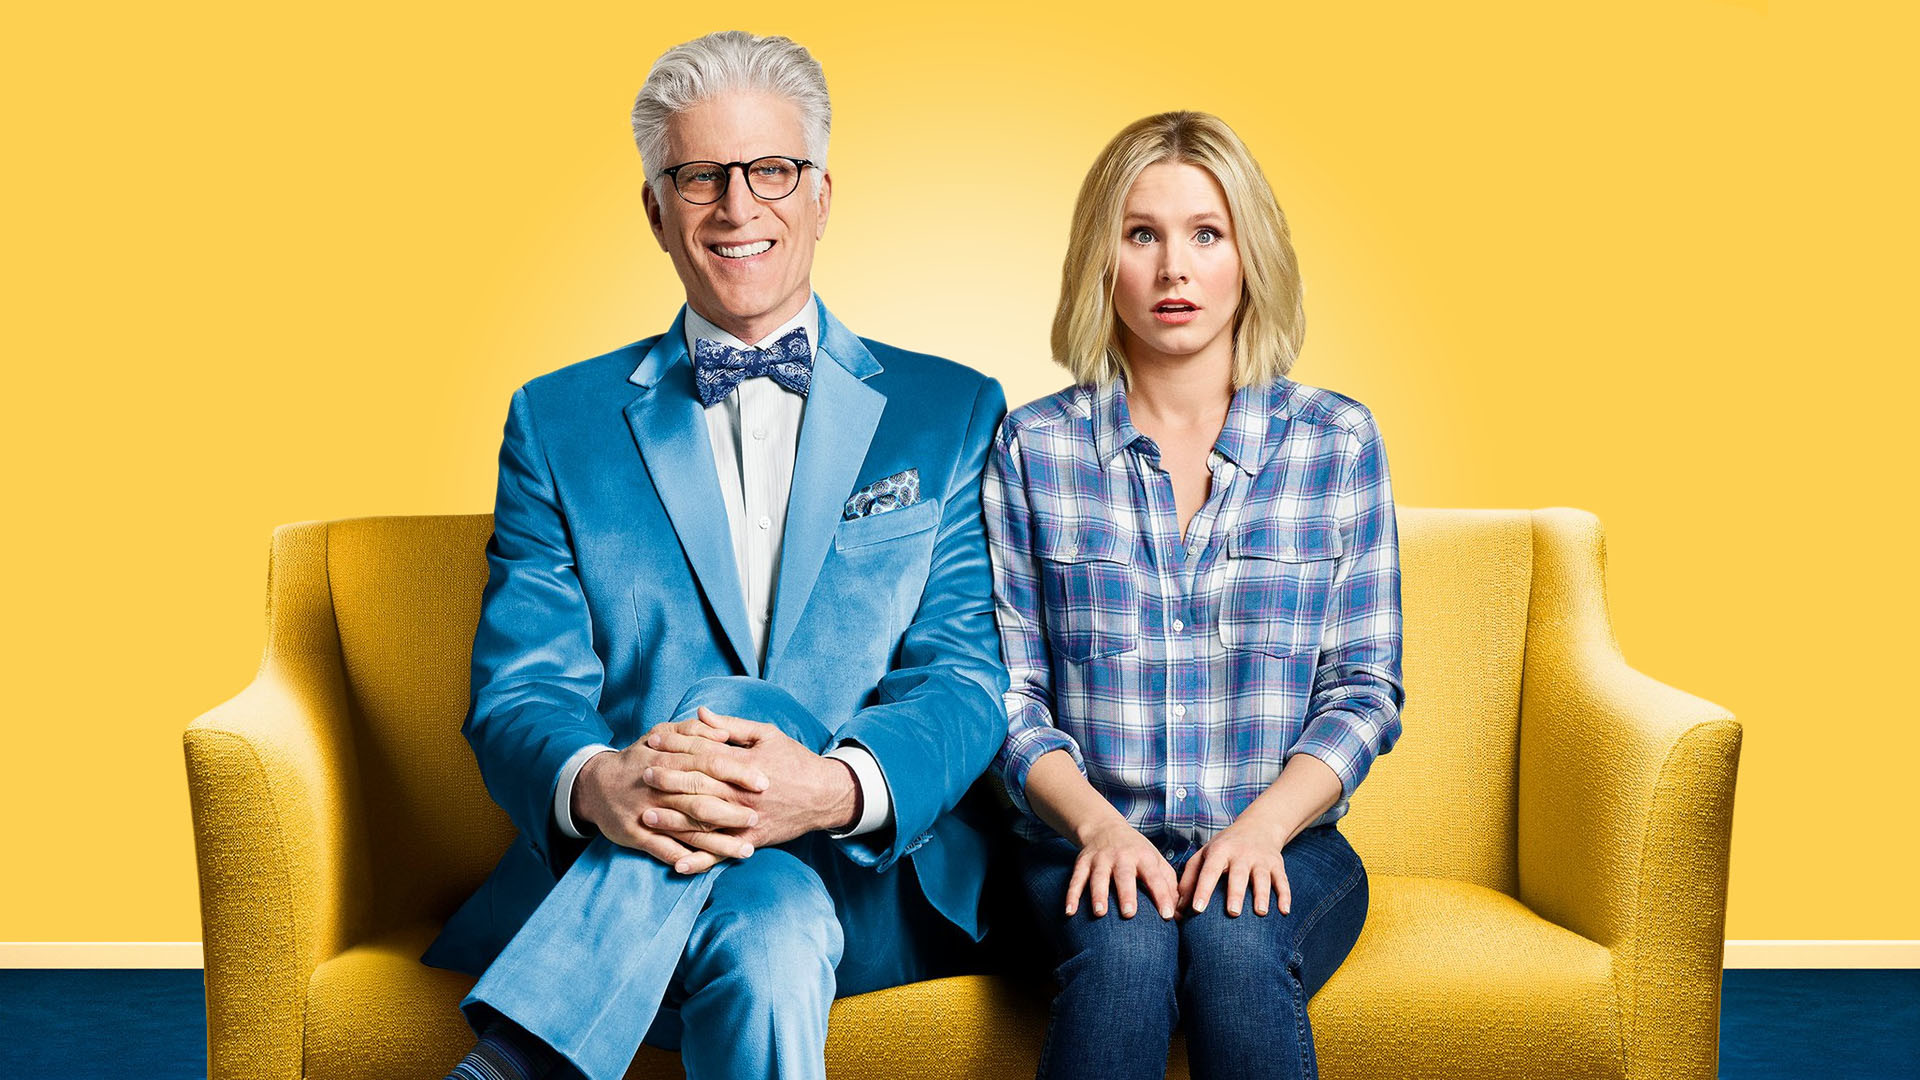 HQ The Good Place Wallpapers | File 463.15Kb